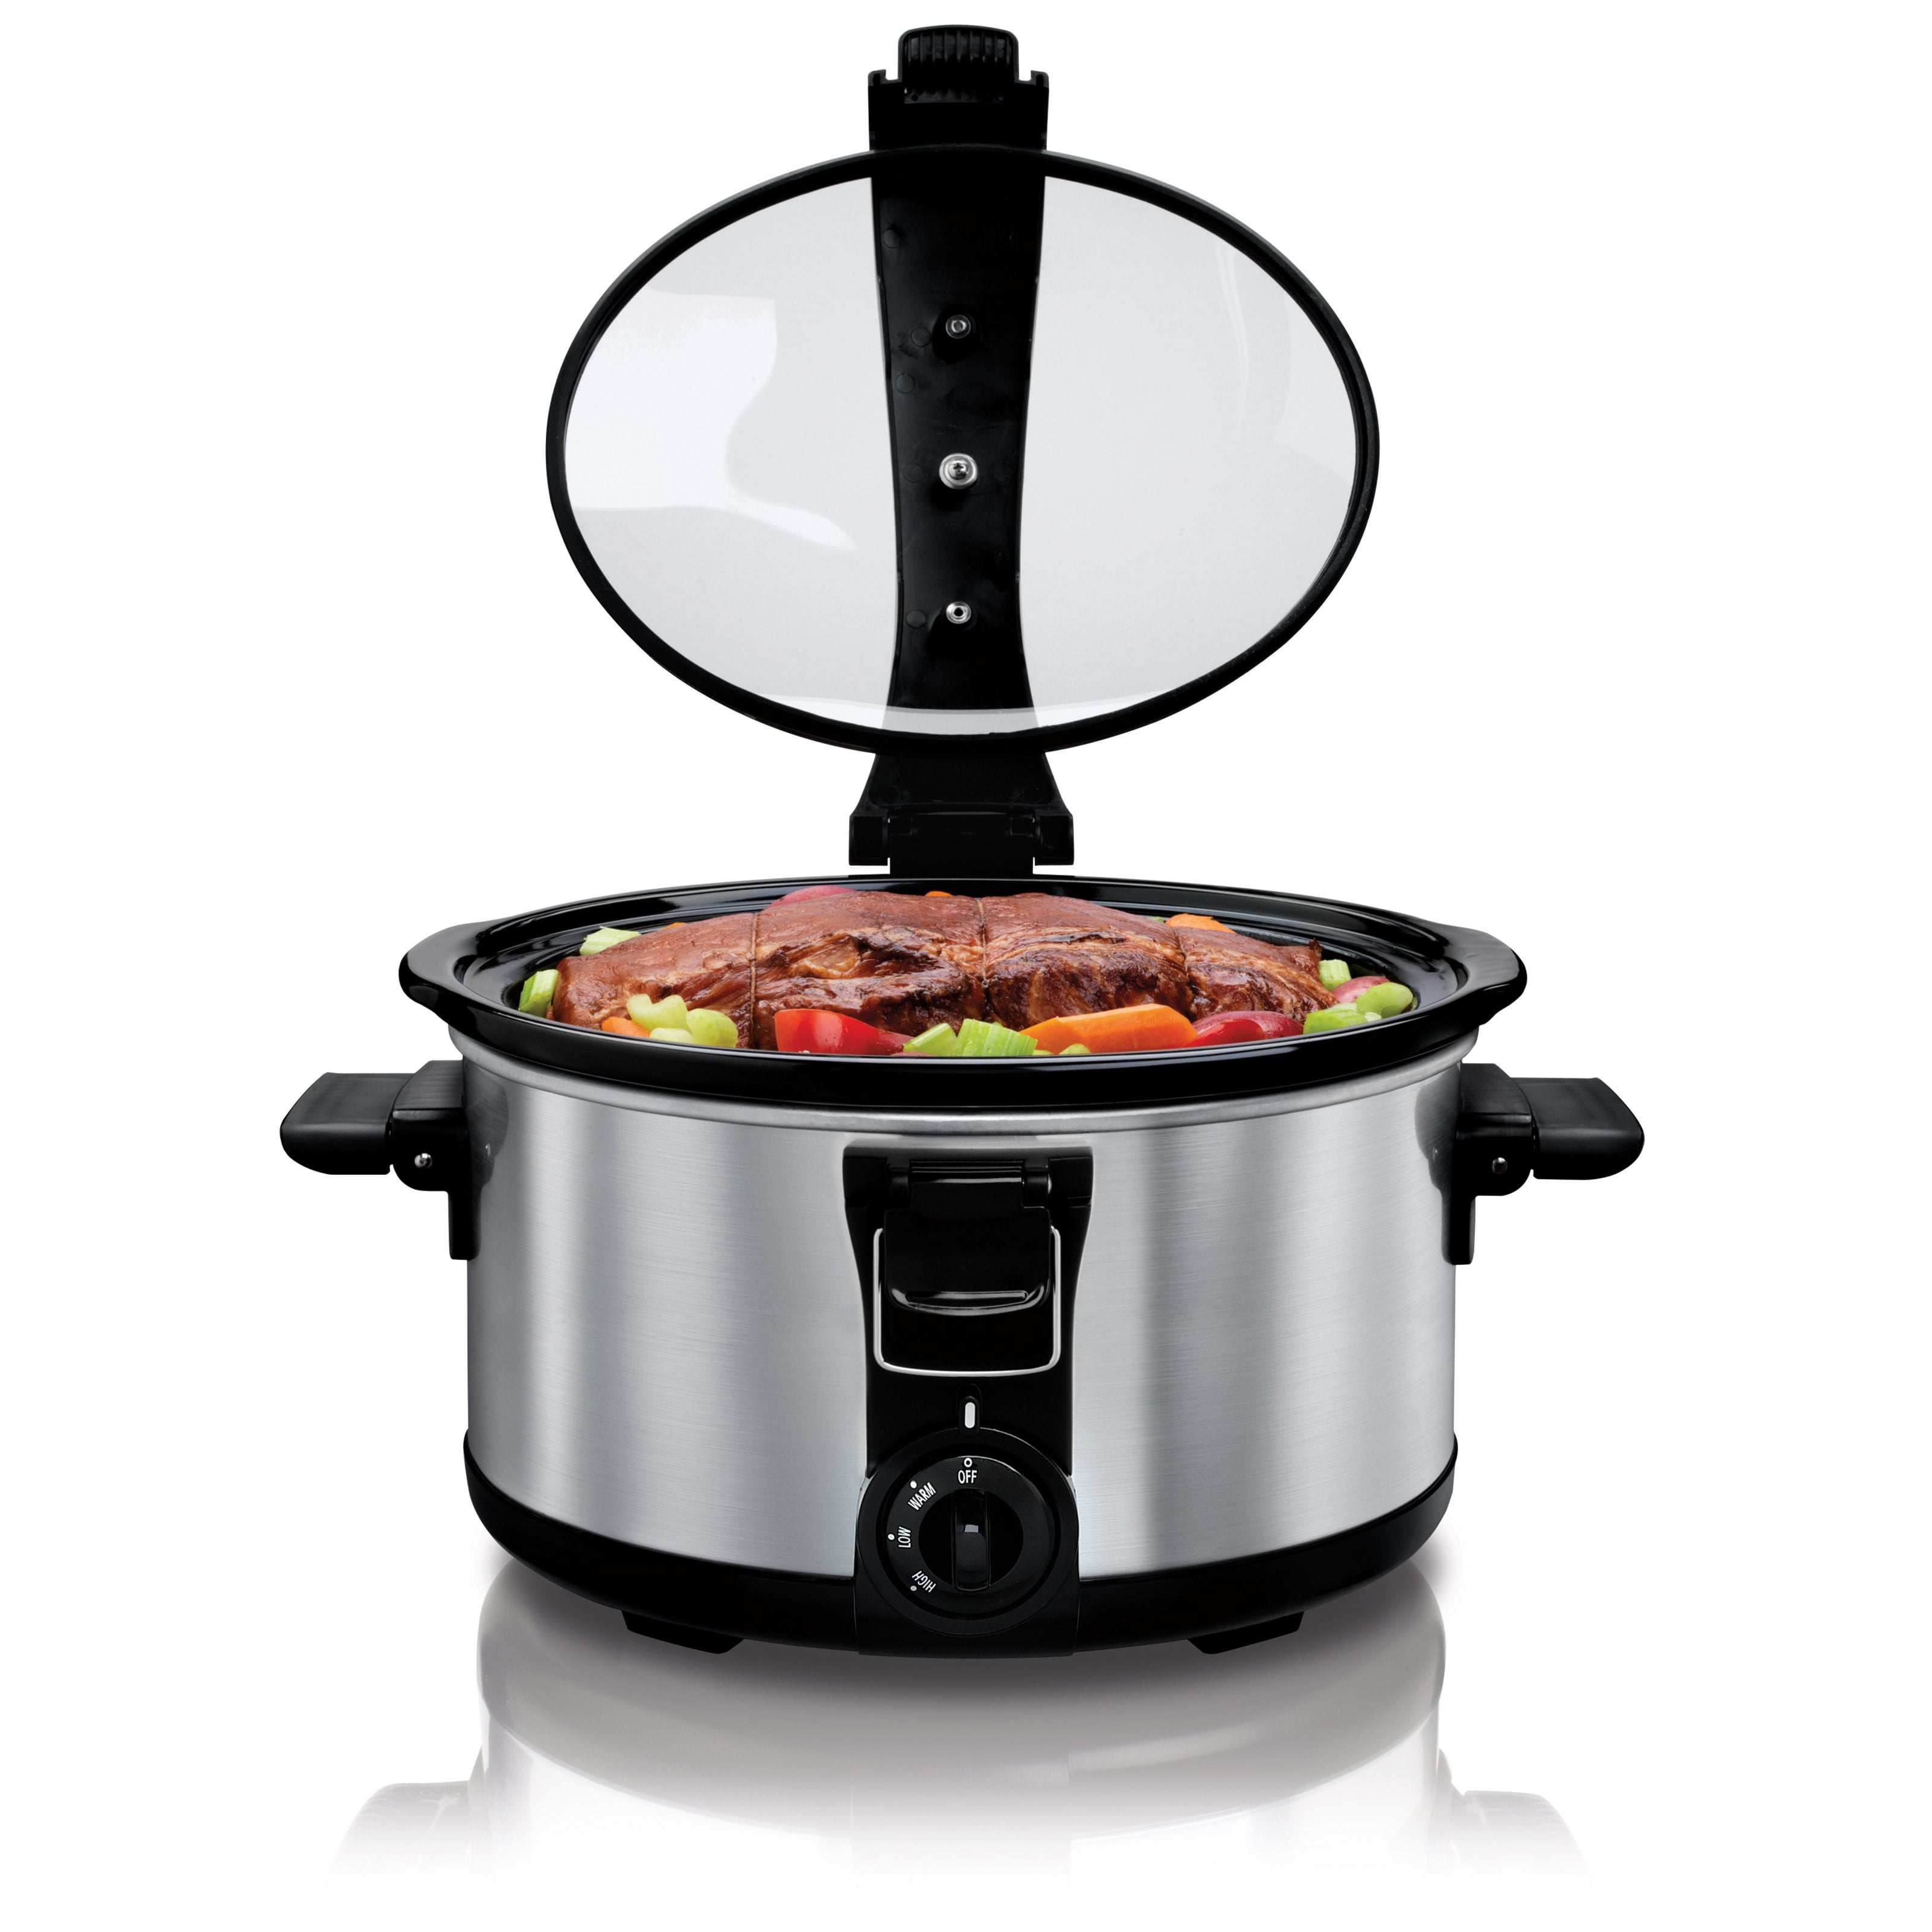 Stay or Go® Programmable 7 Qt. Slow Cooker with Party Dipper